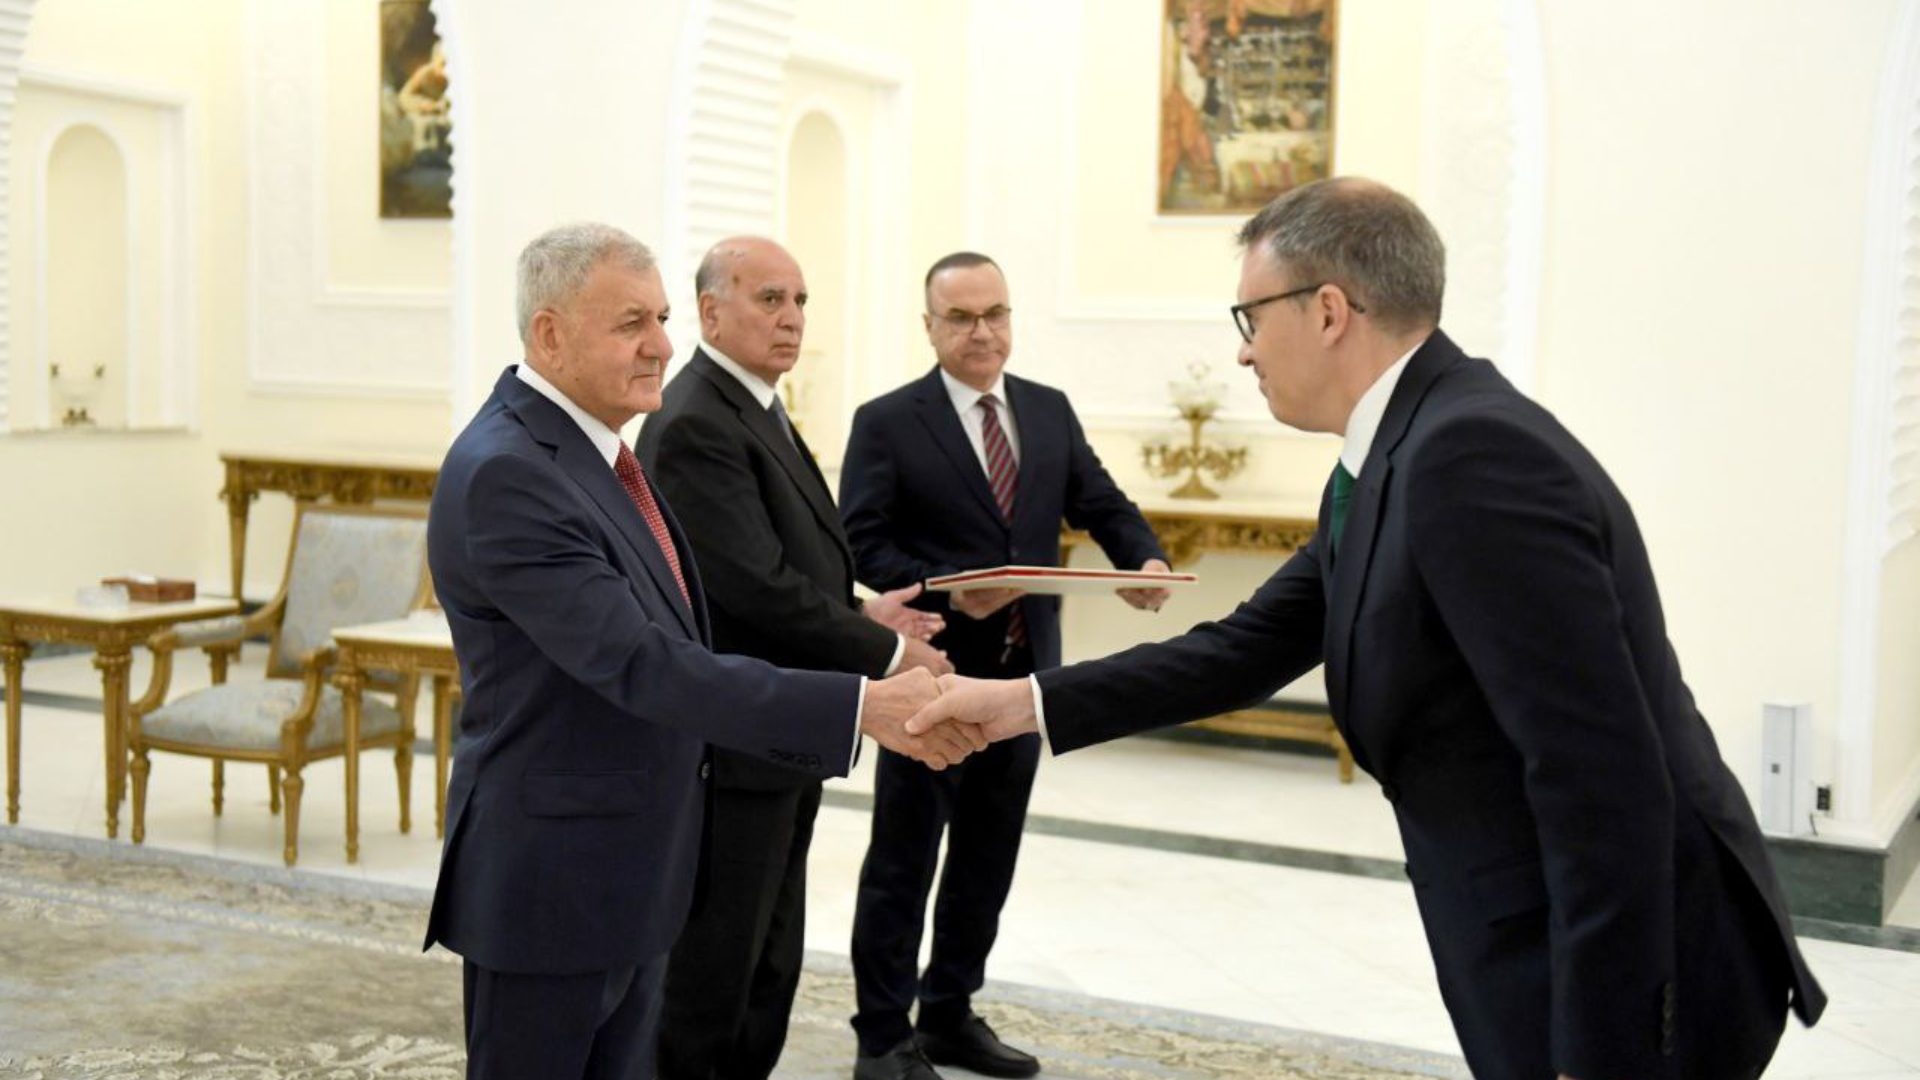 Iraqi President receives credentials from newly appointed ambassadors